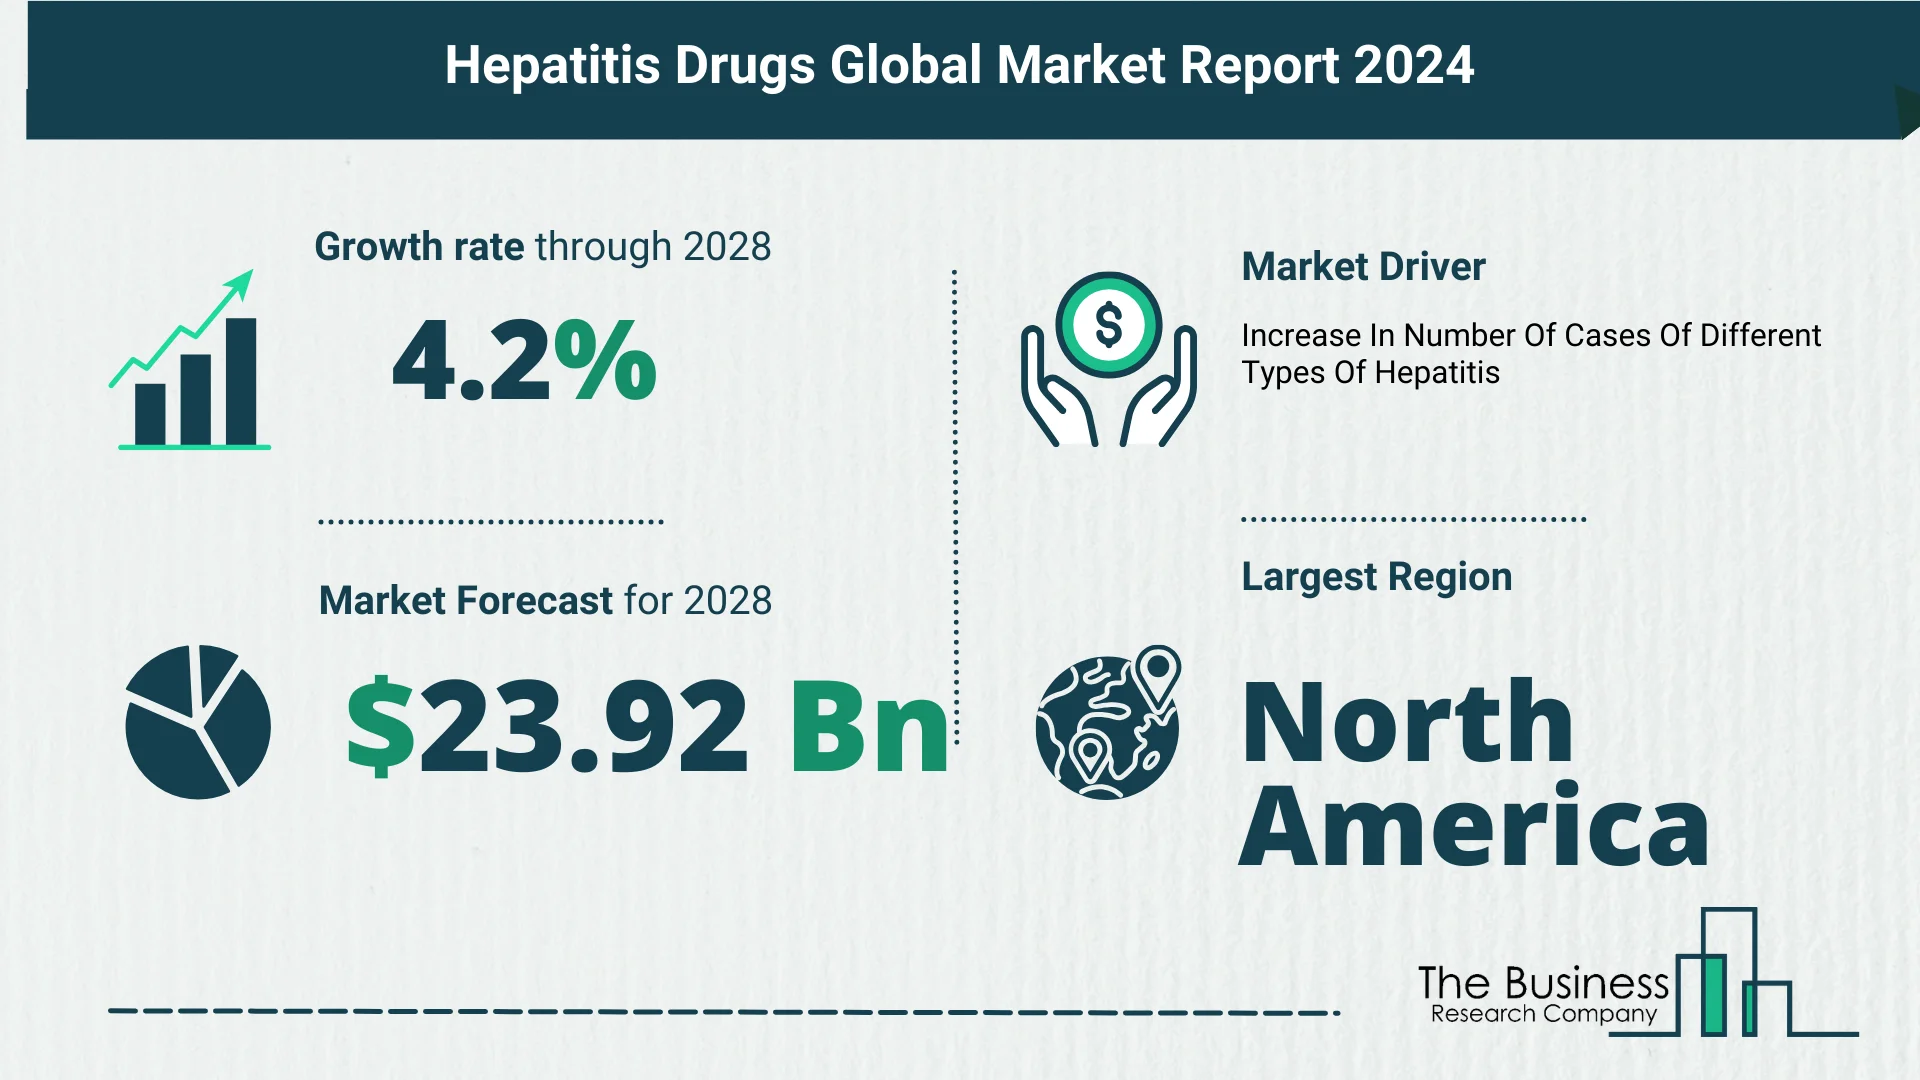 How Is The Hepatitis Drugs Market Expected To Grow Through 2024-2033